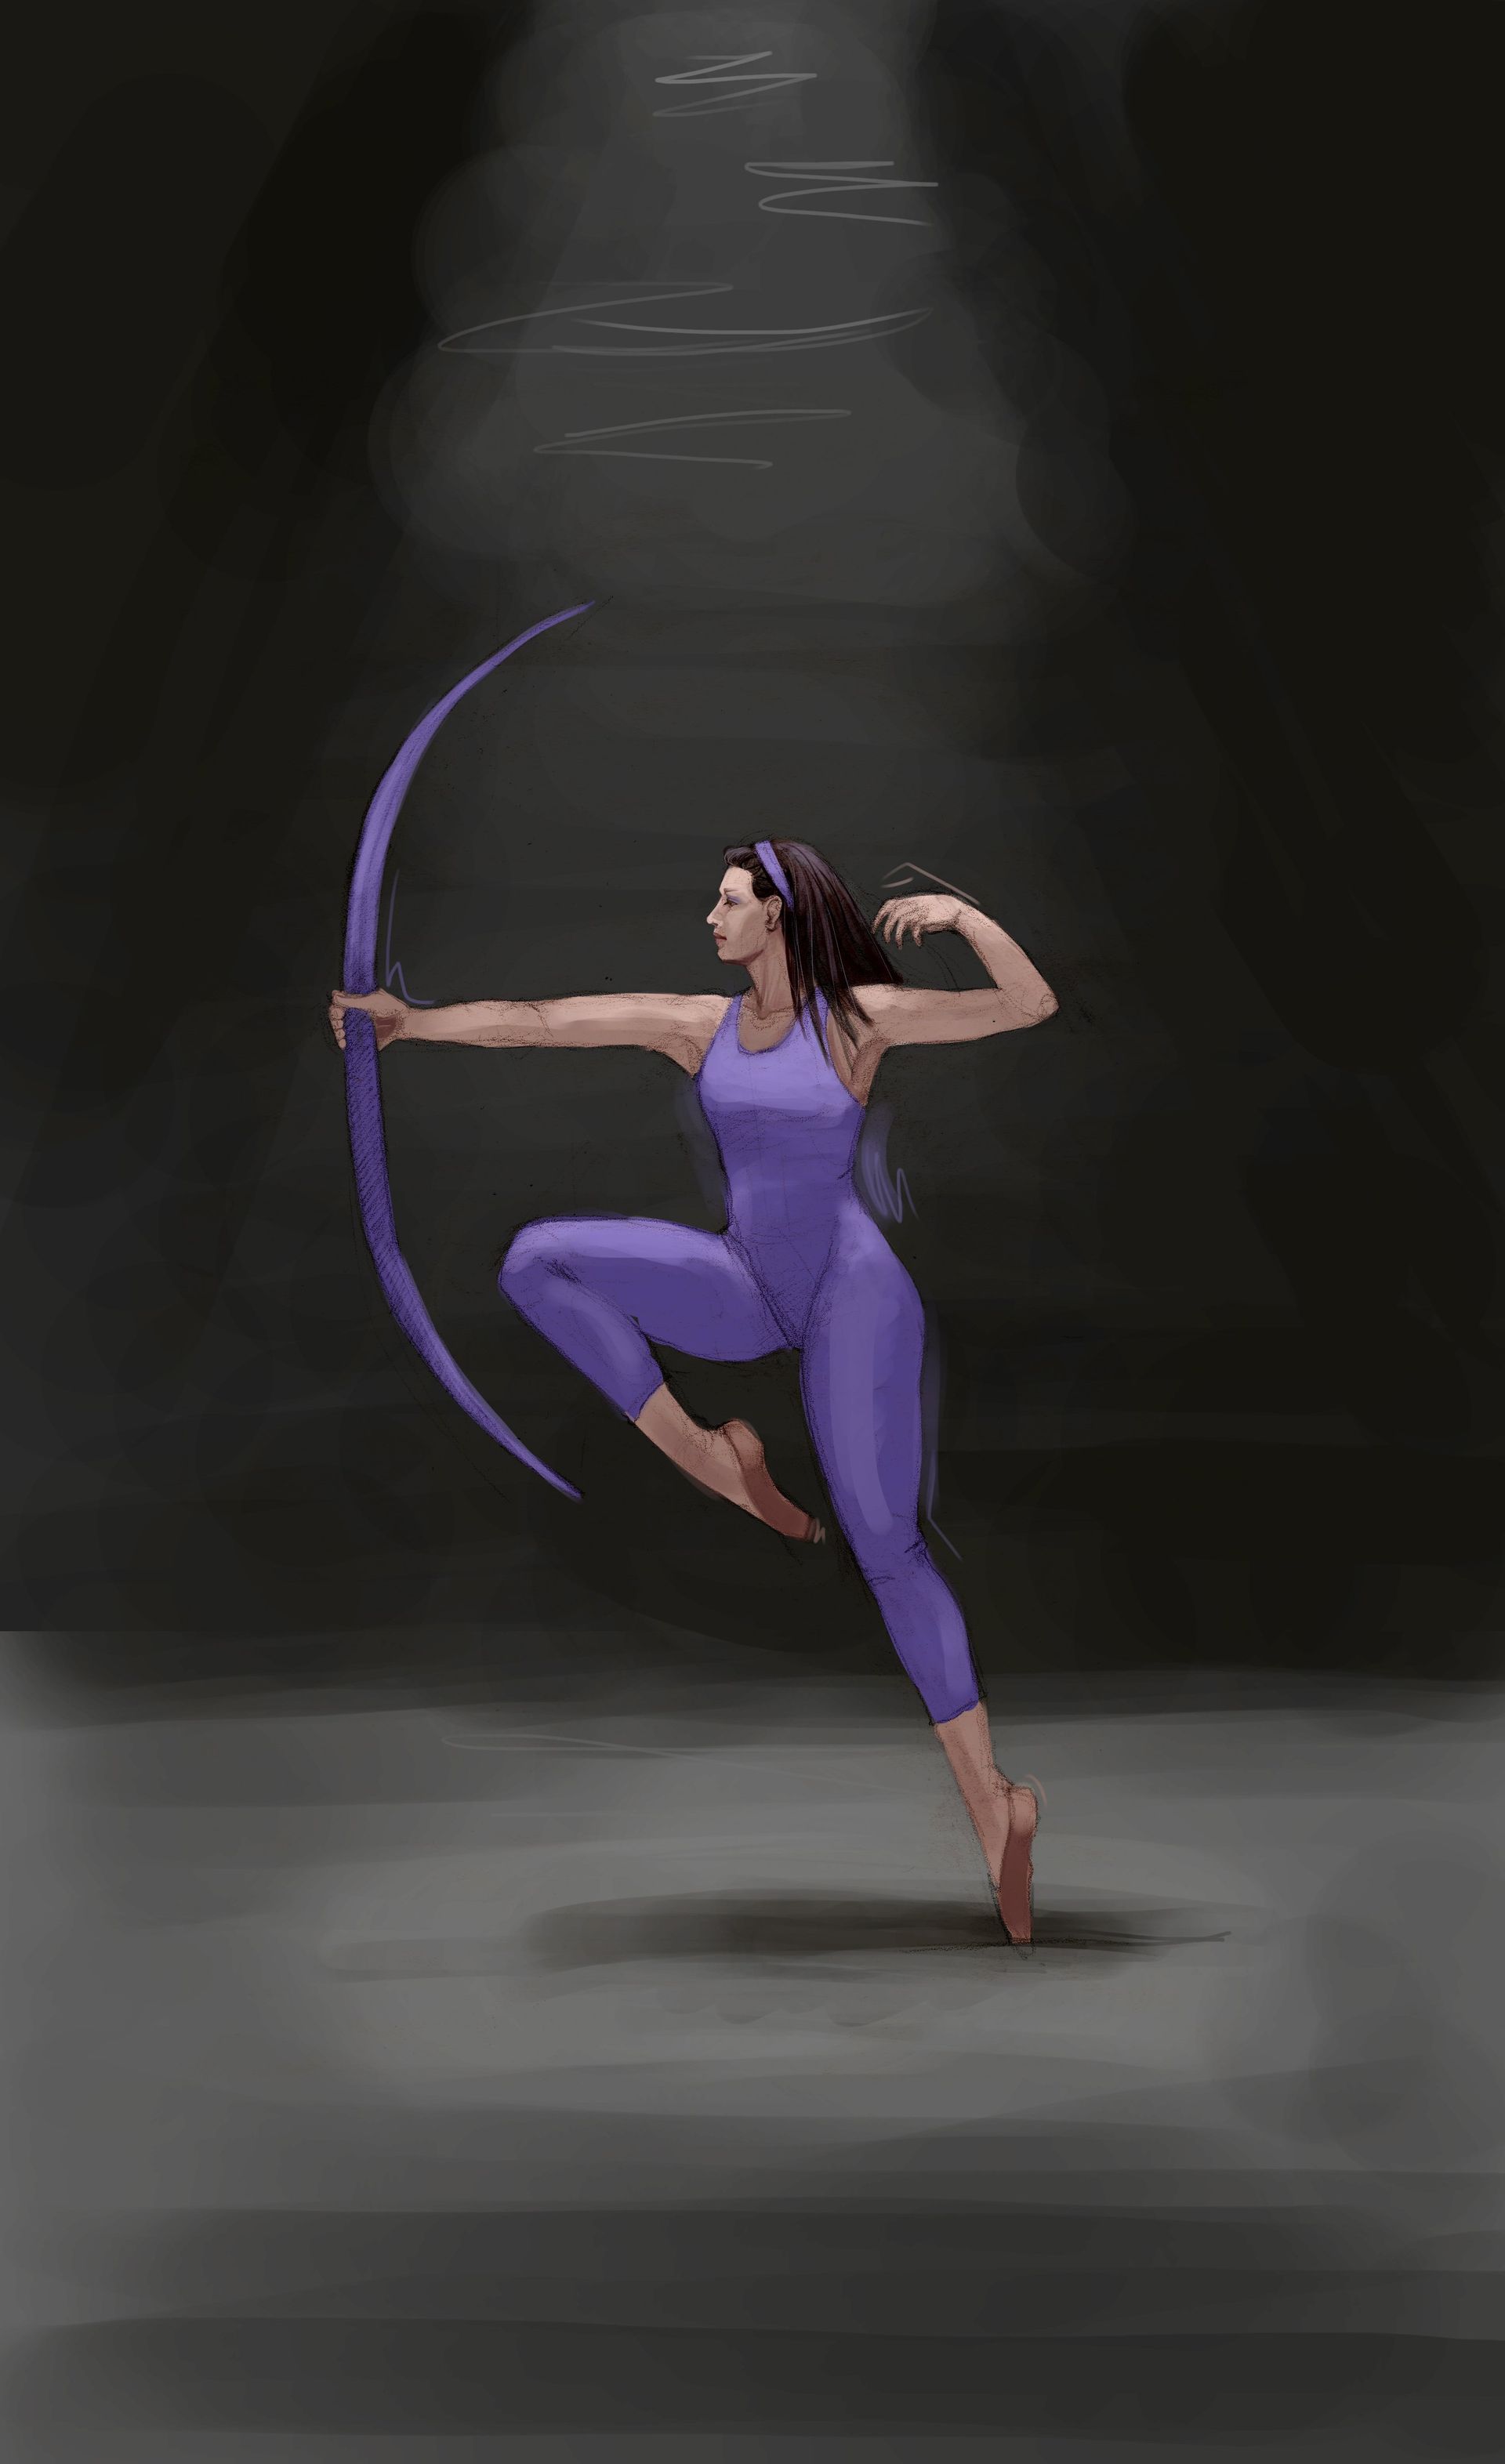 White woman in a purple leotard with a purple bow prop and a purple headband, standing on one toe in a stylized archer pose.